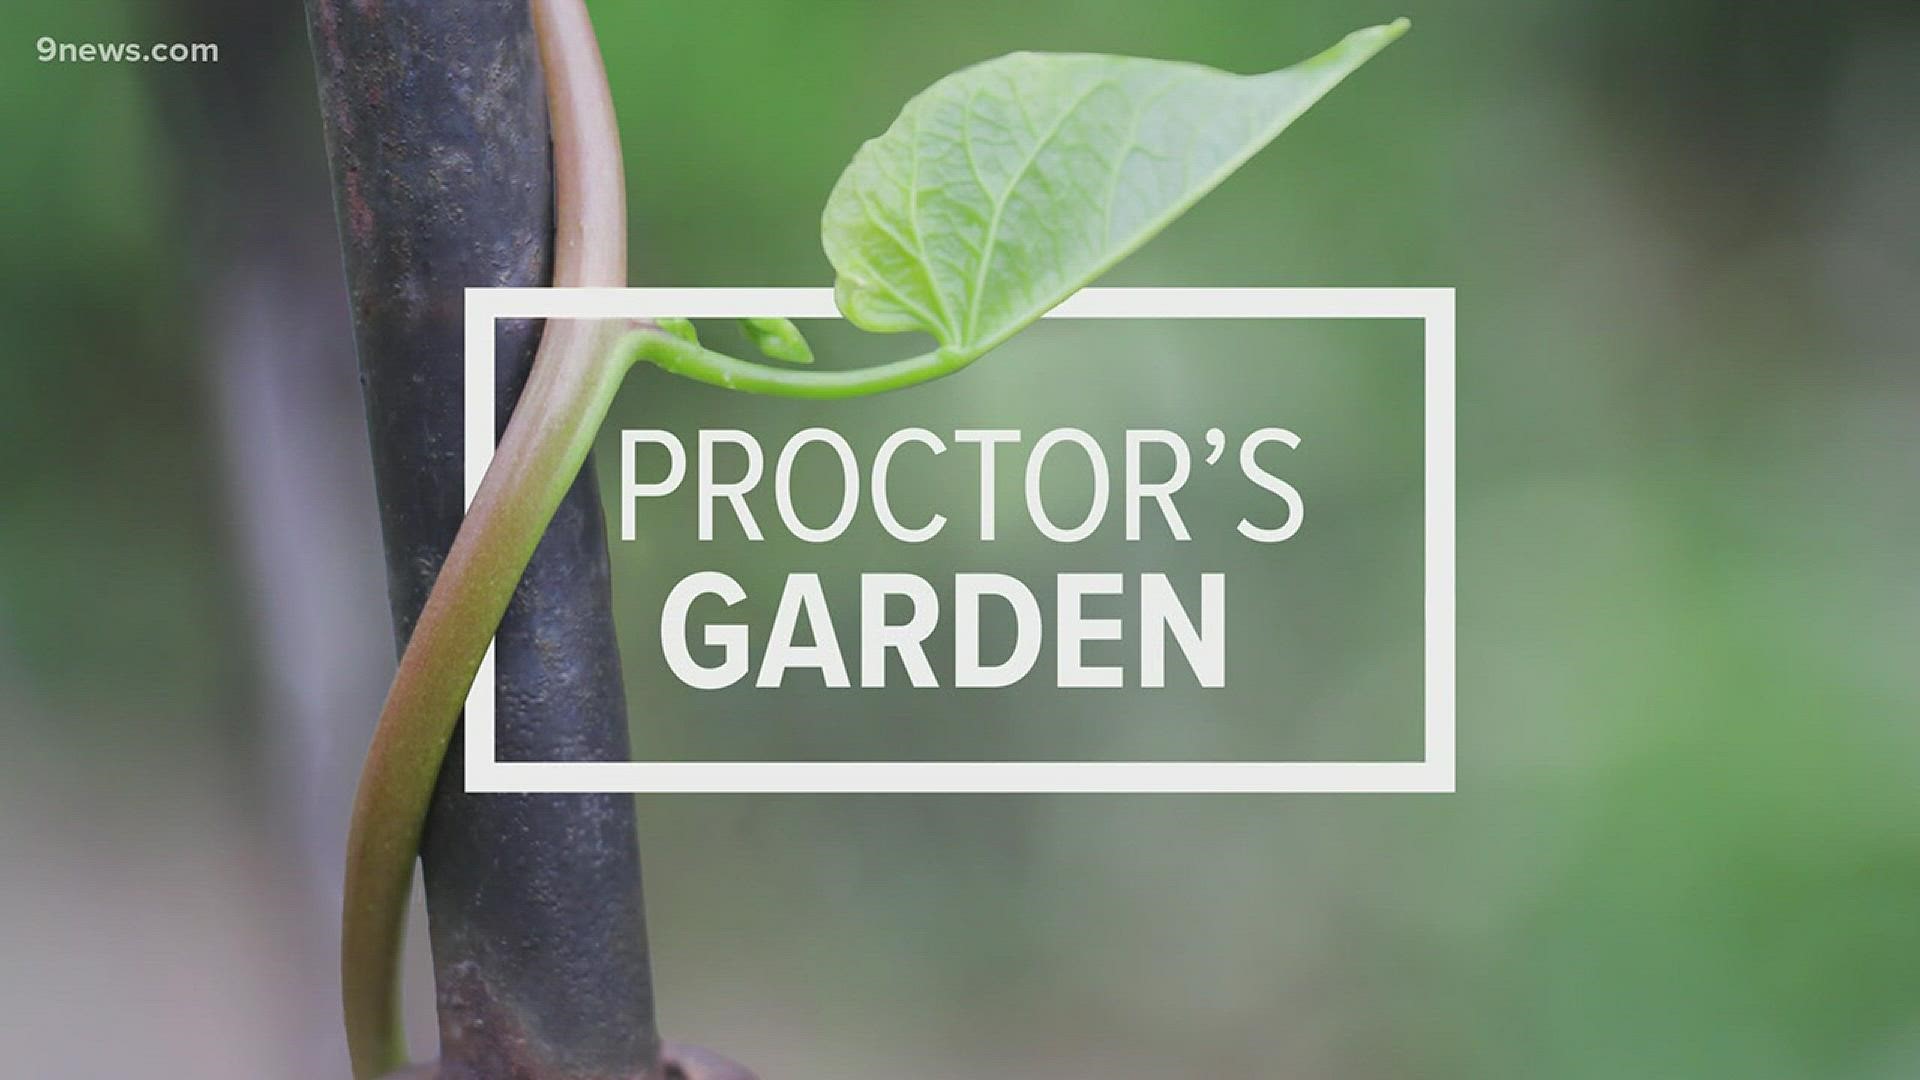 Rob Proctor shares his secrets for keeping your home garden green all year round.